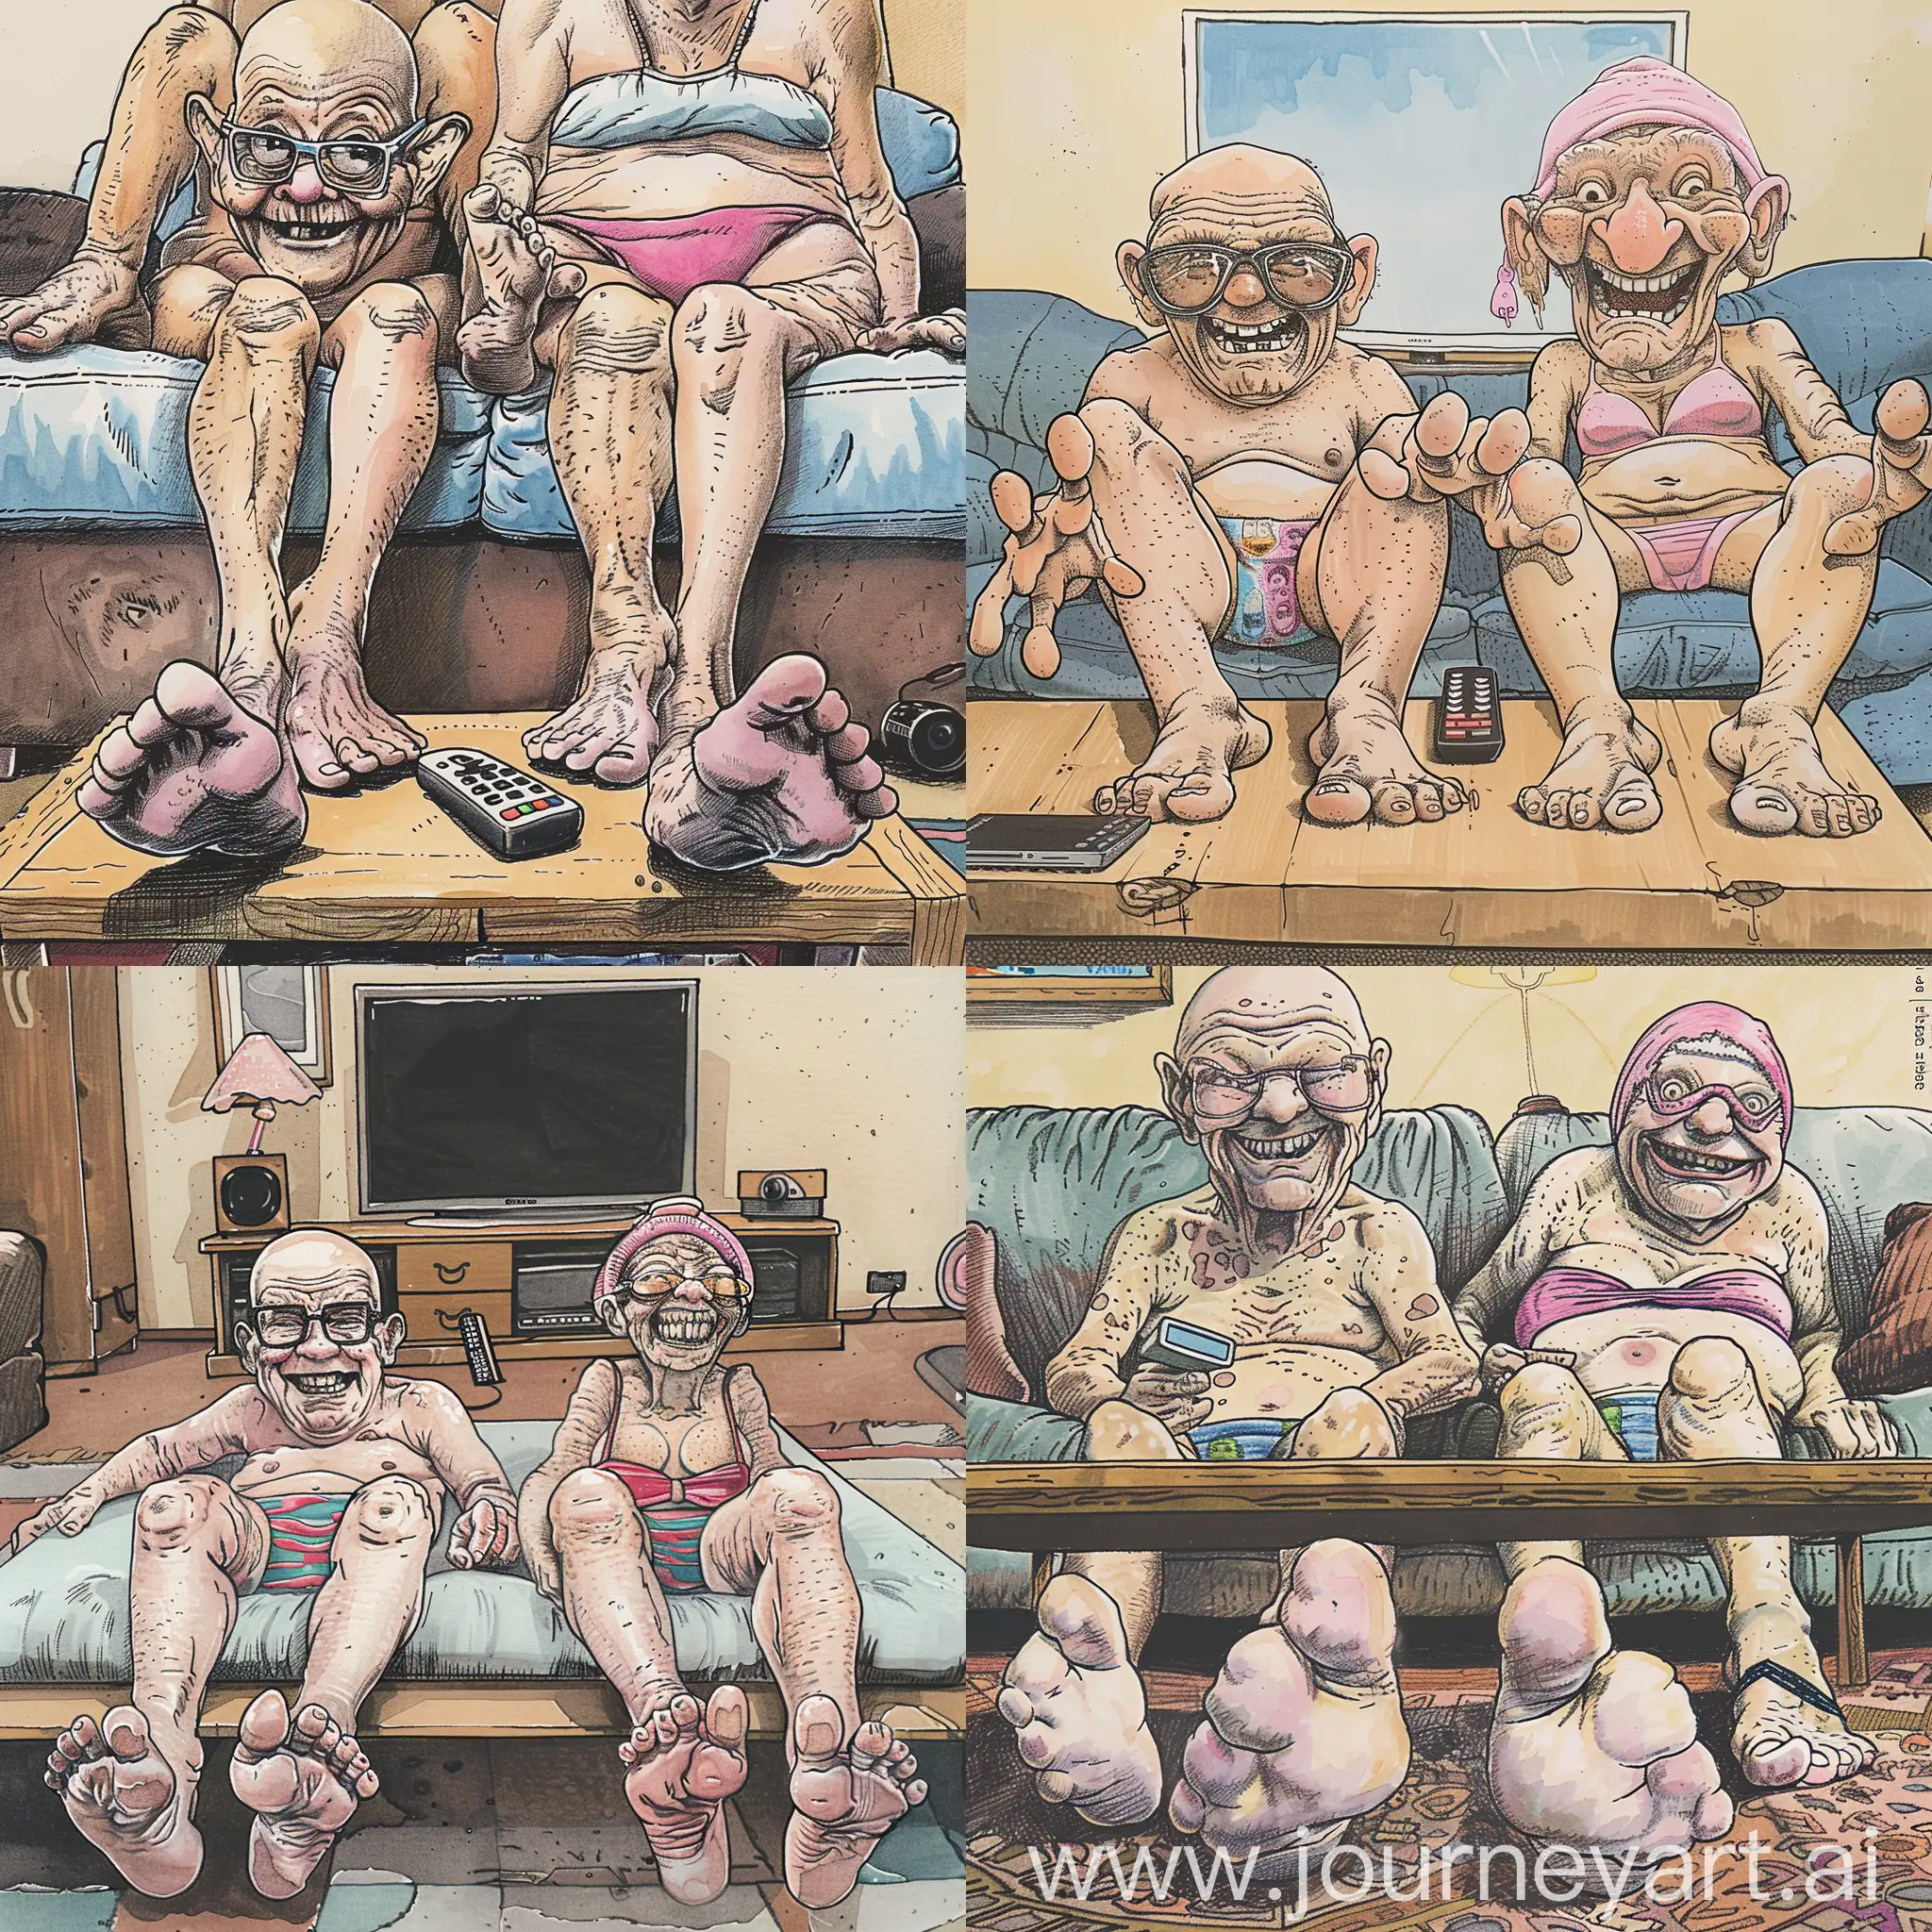 Elderly-Couple-Relaxing-on-Couch-in-Swimwear-with-Quirky-Accessories